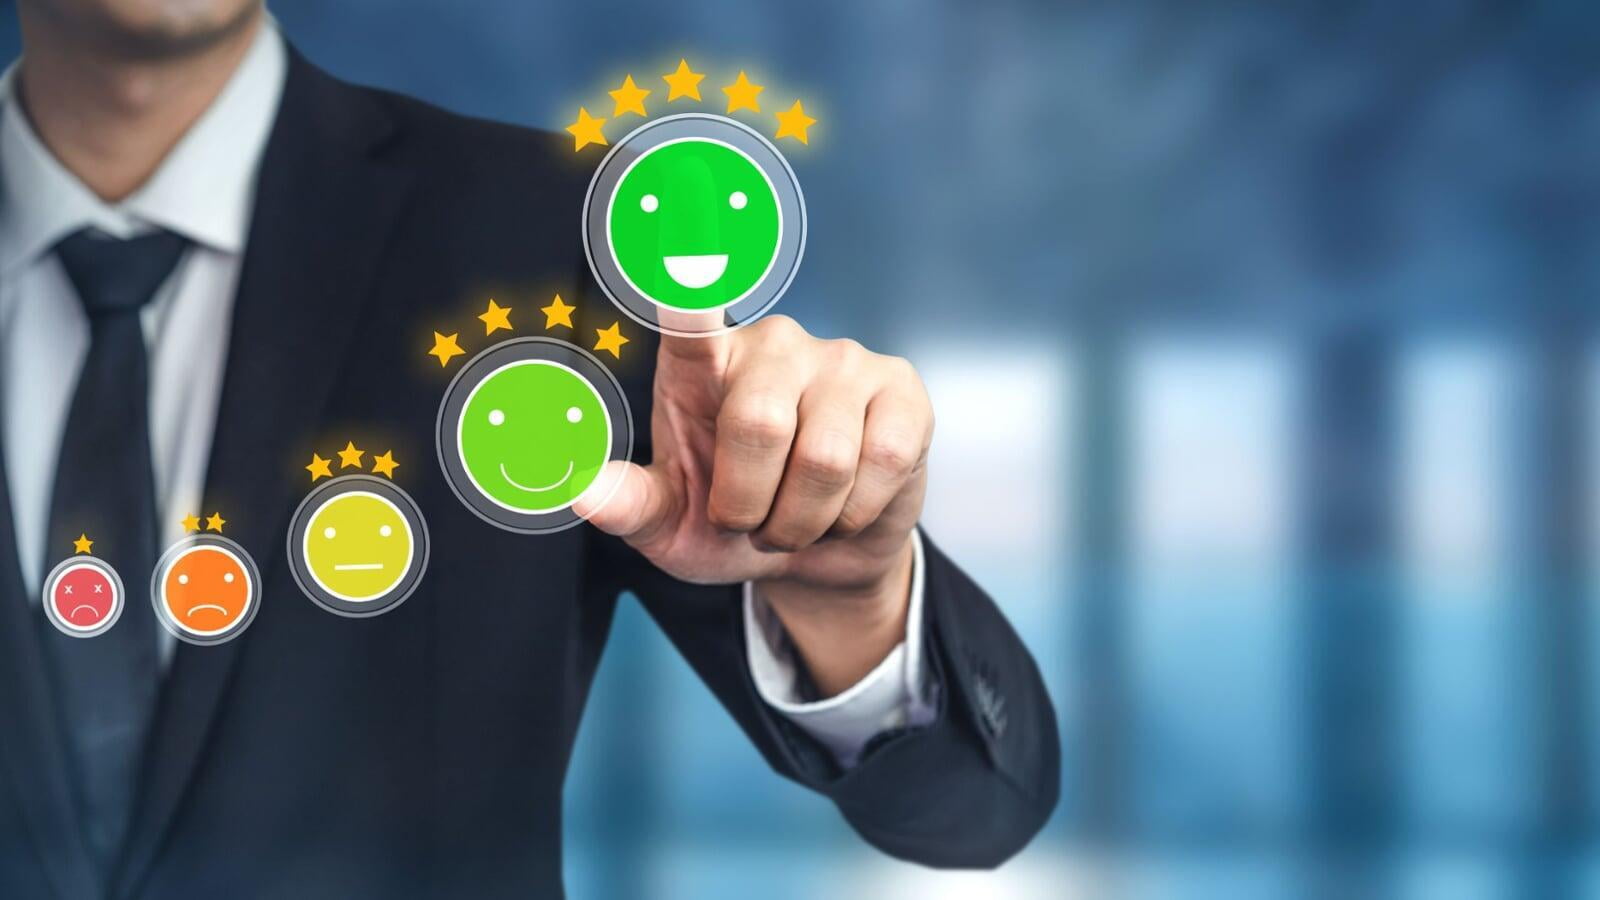 Happy clients review: Testimonials showcasing customer satisfaction and positive feedback